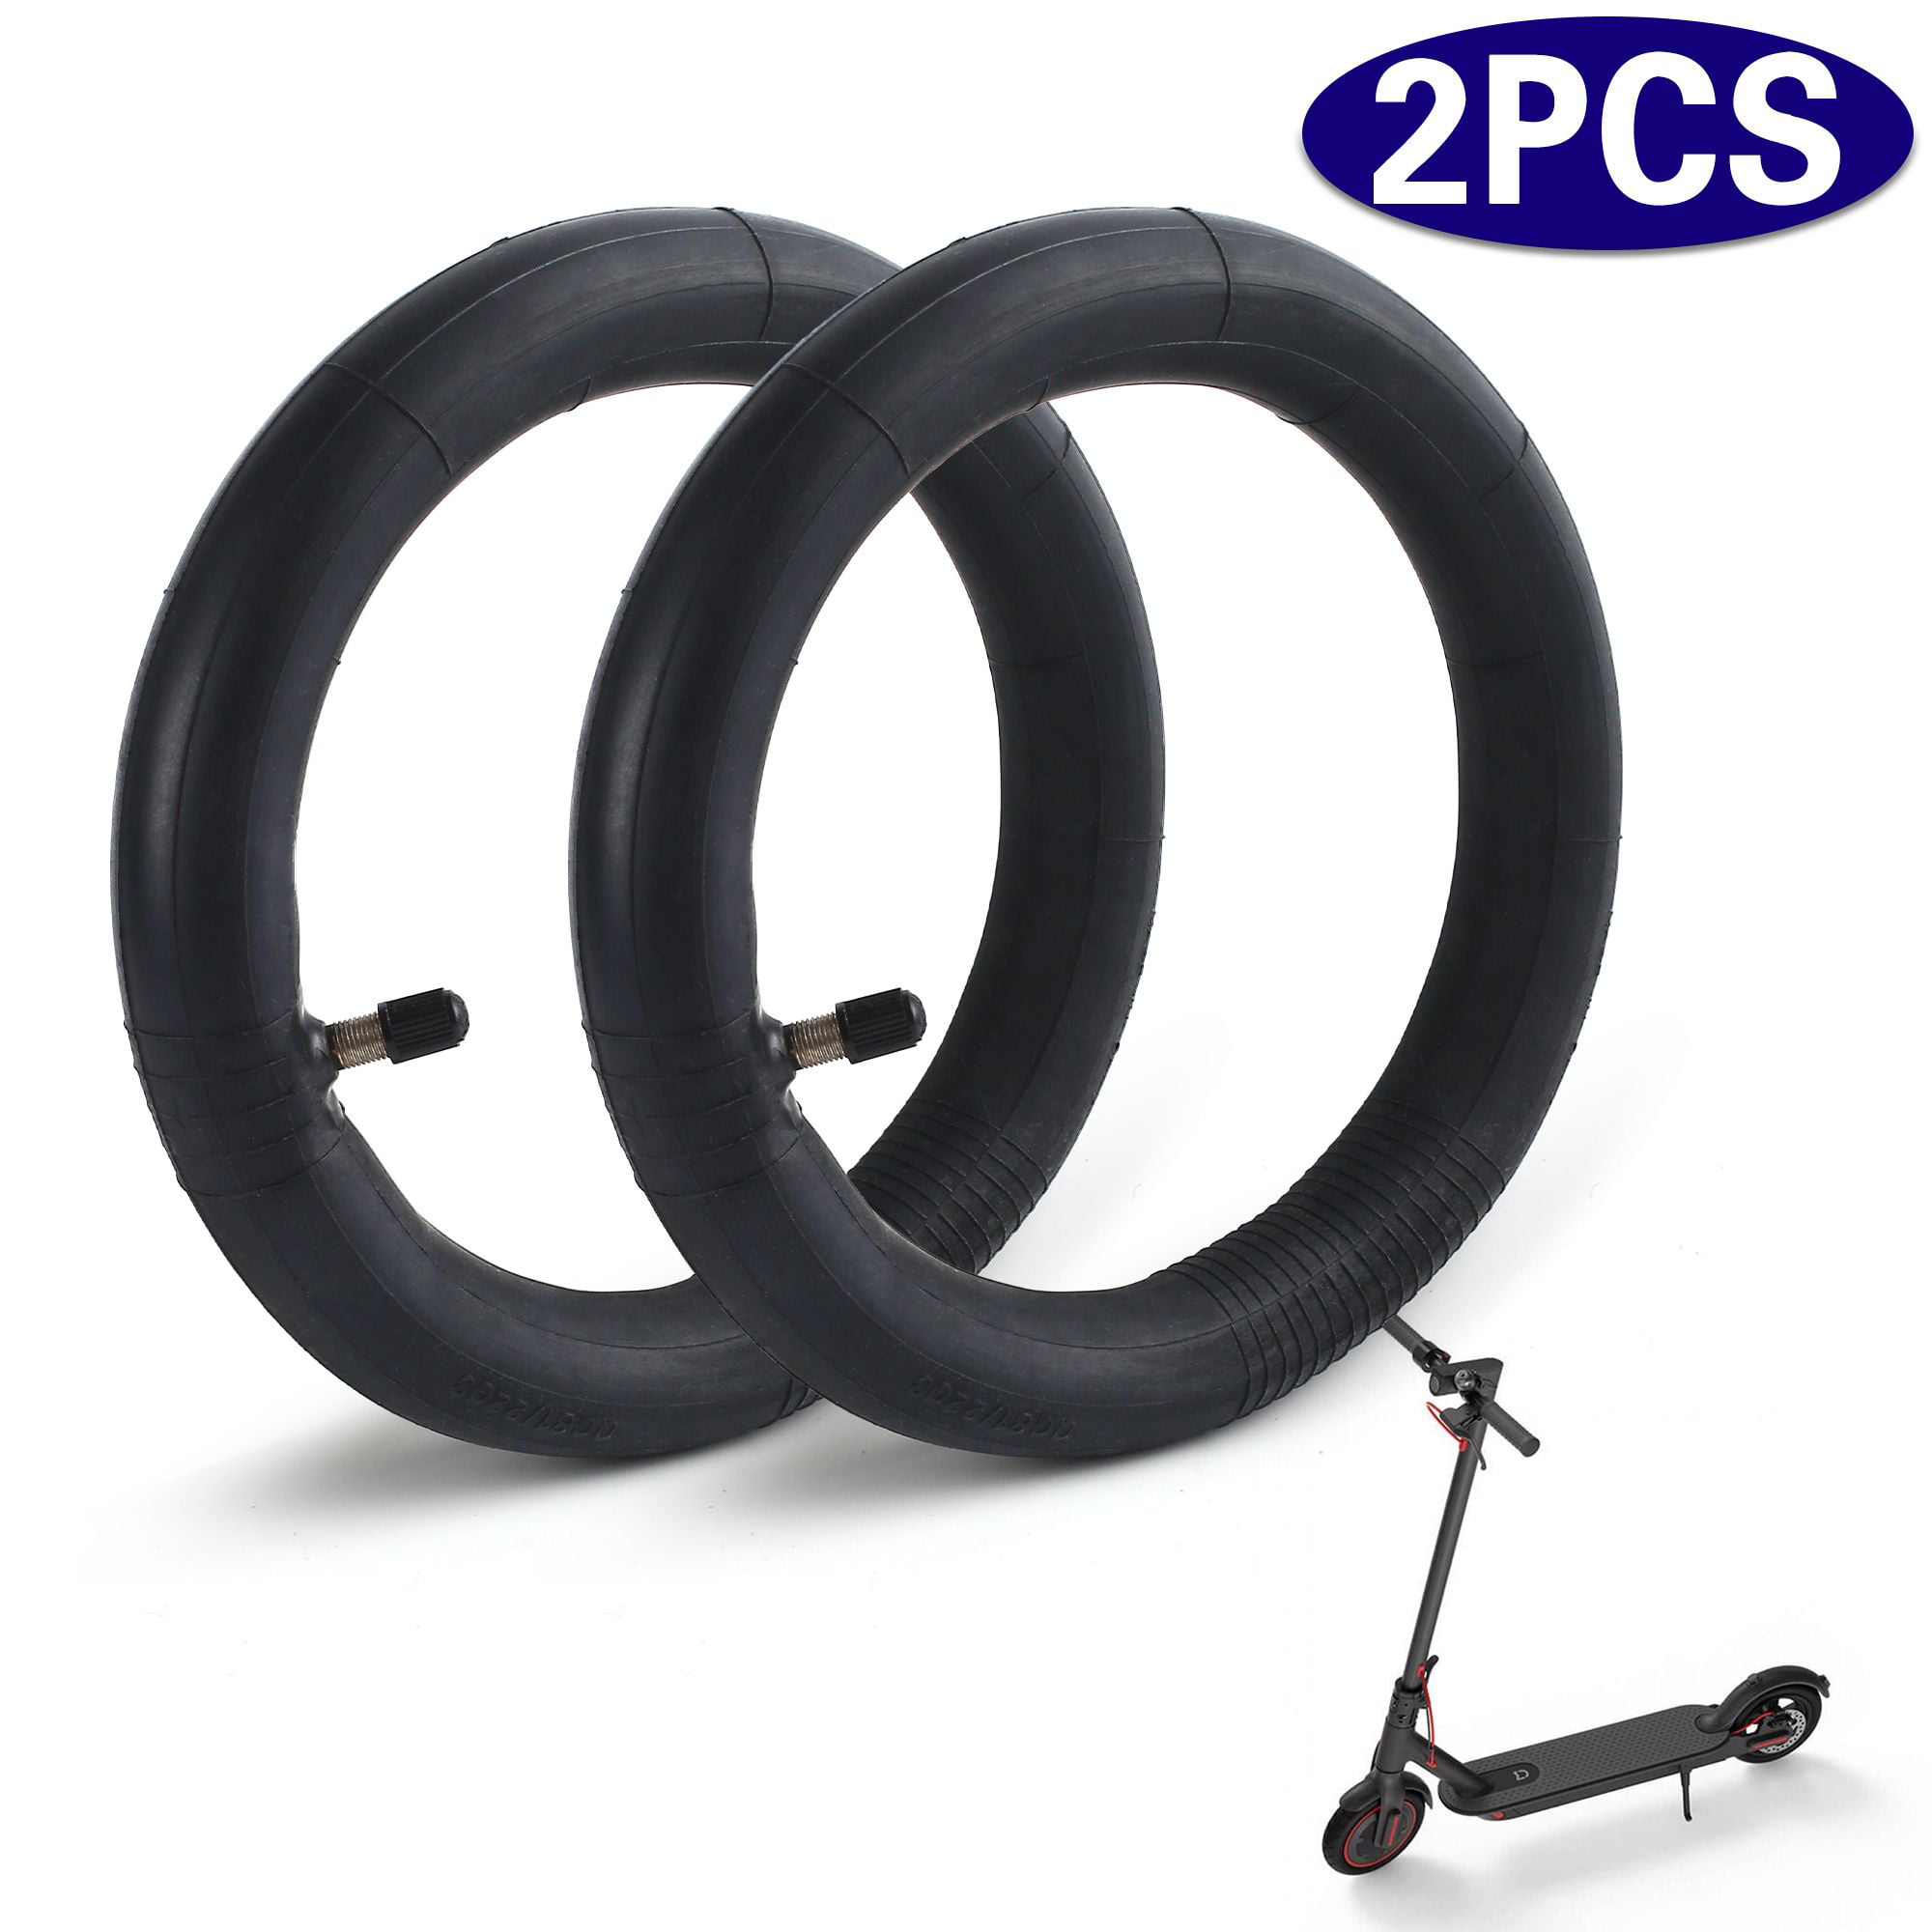 Gotrax V2 Scooter Wheel 2Pcs 8.5" Thicken Tire Inner Tubes for Xiaomi M365 